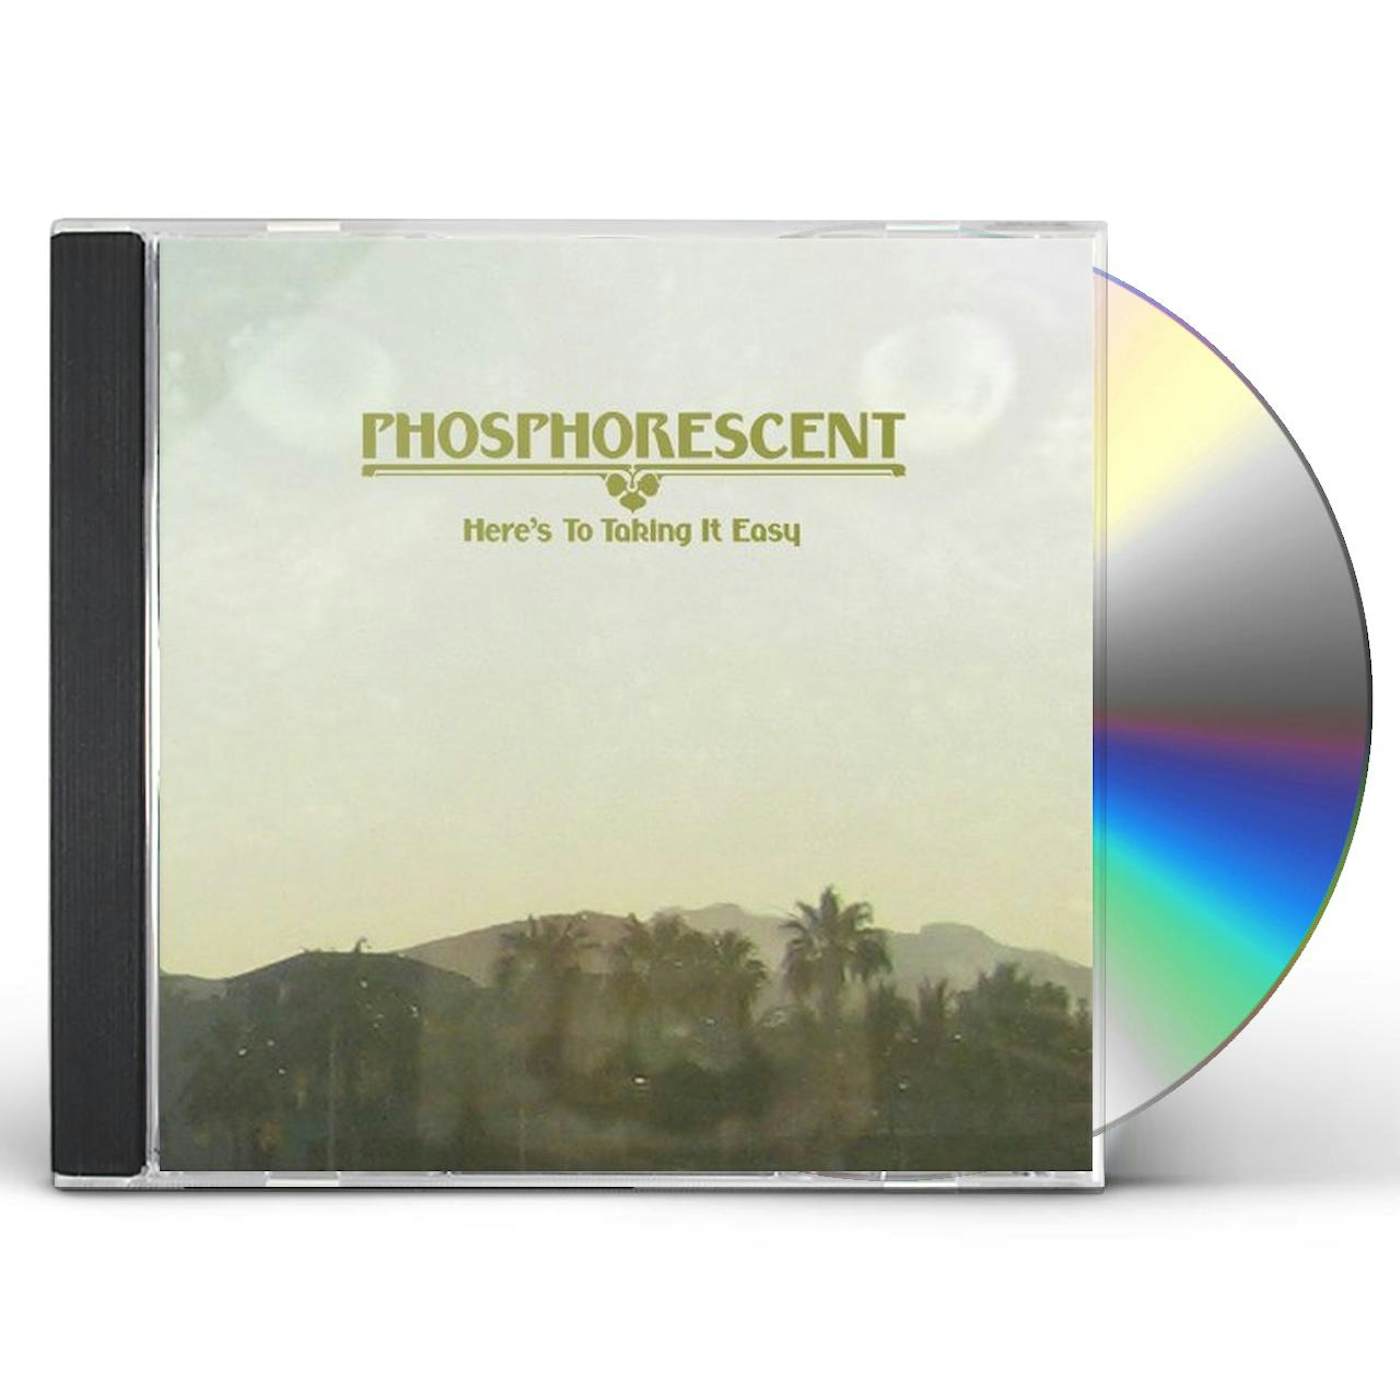 Phosphorescent HERE'S TO TAKING IT EASY CD